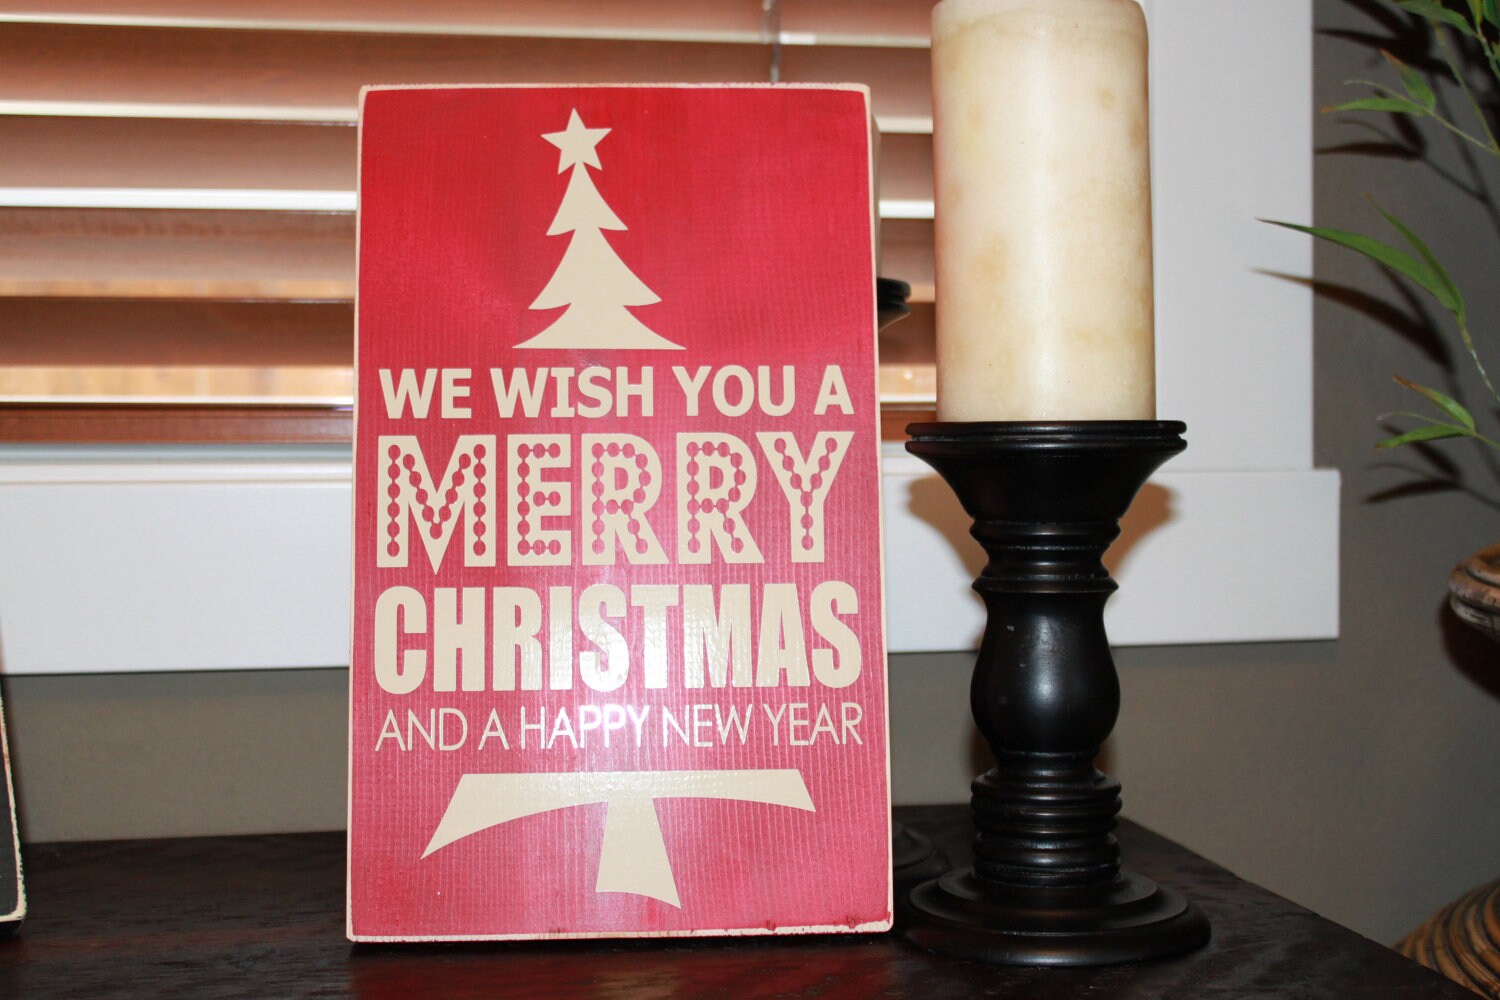 We Wish You A Merry Christmas and a Happy New Year by SignsbyJen